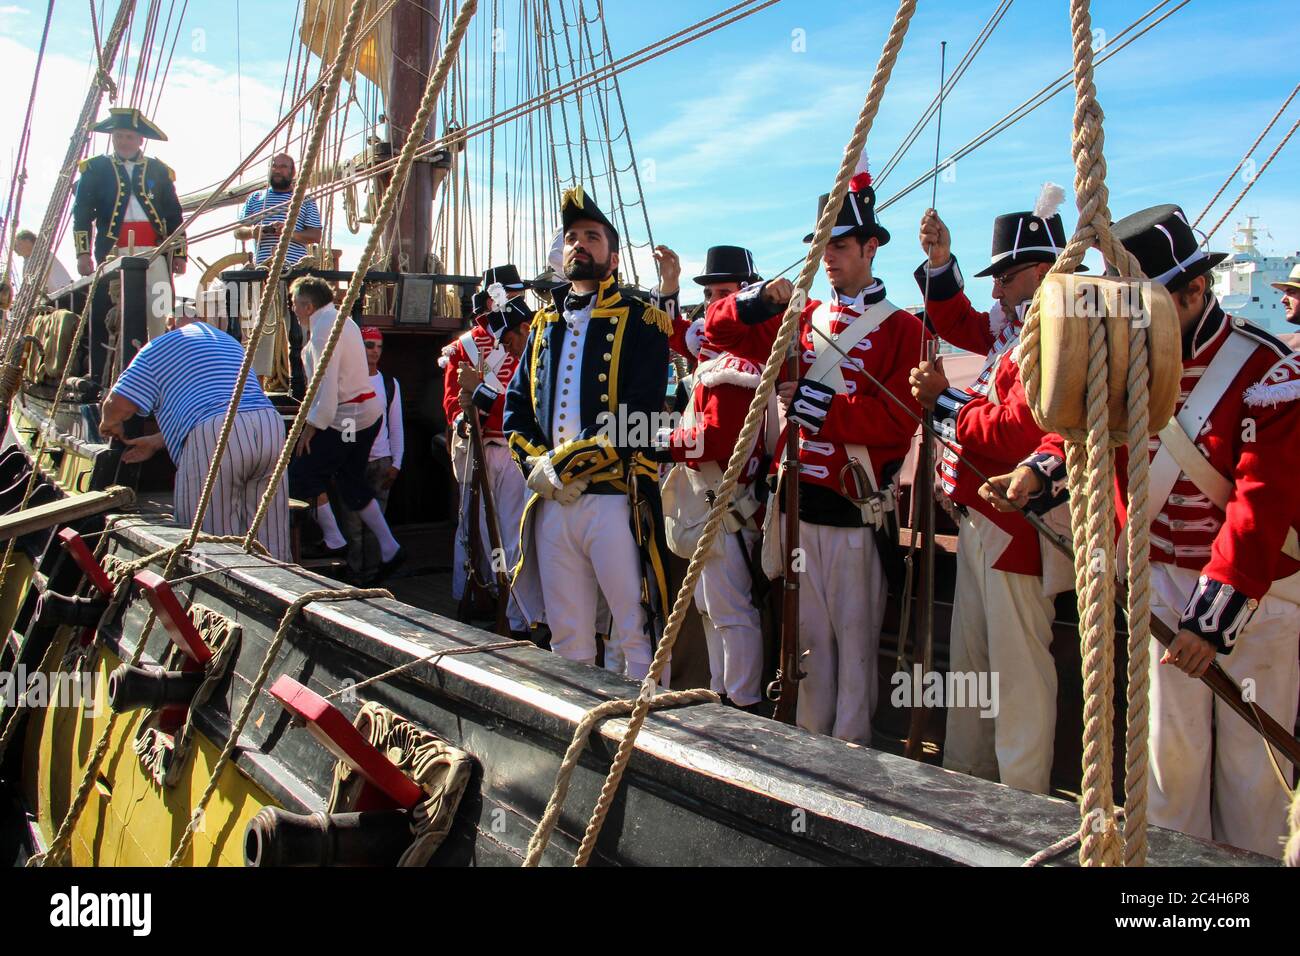 Malaga, Spain - October 26, 2014: Captain of the Royal Navy in the 18th century on a ship with his crew of marines and seamen. Reenactors on a brig wi Stock Photo